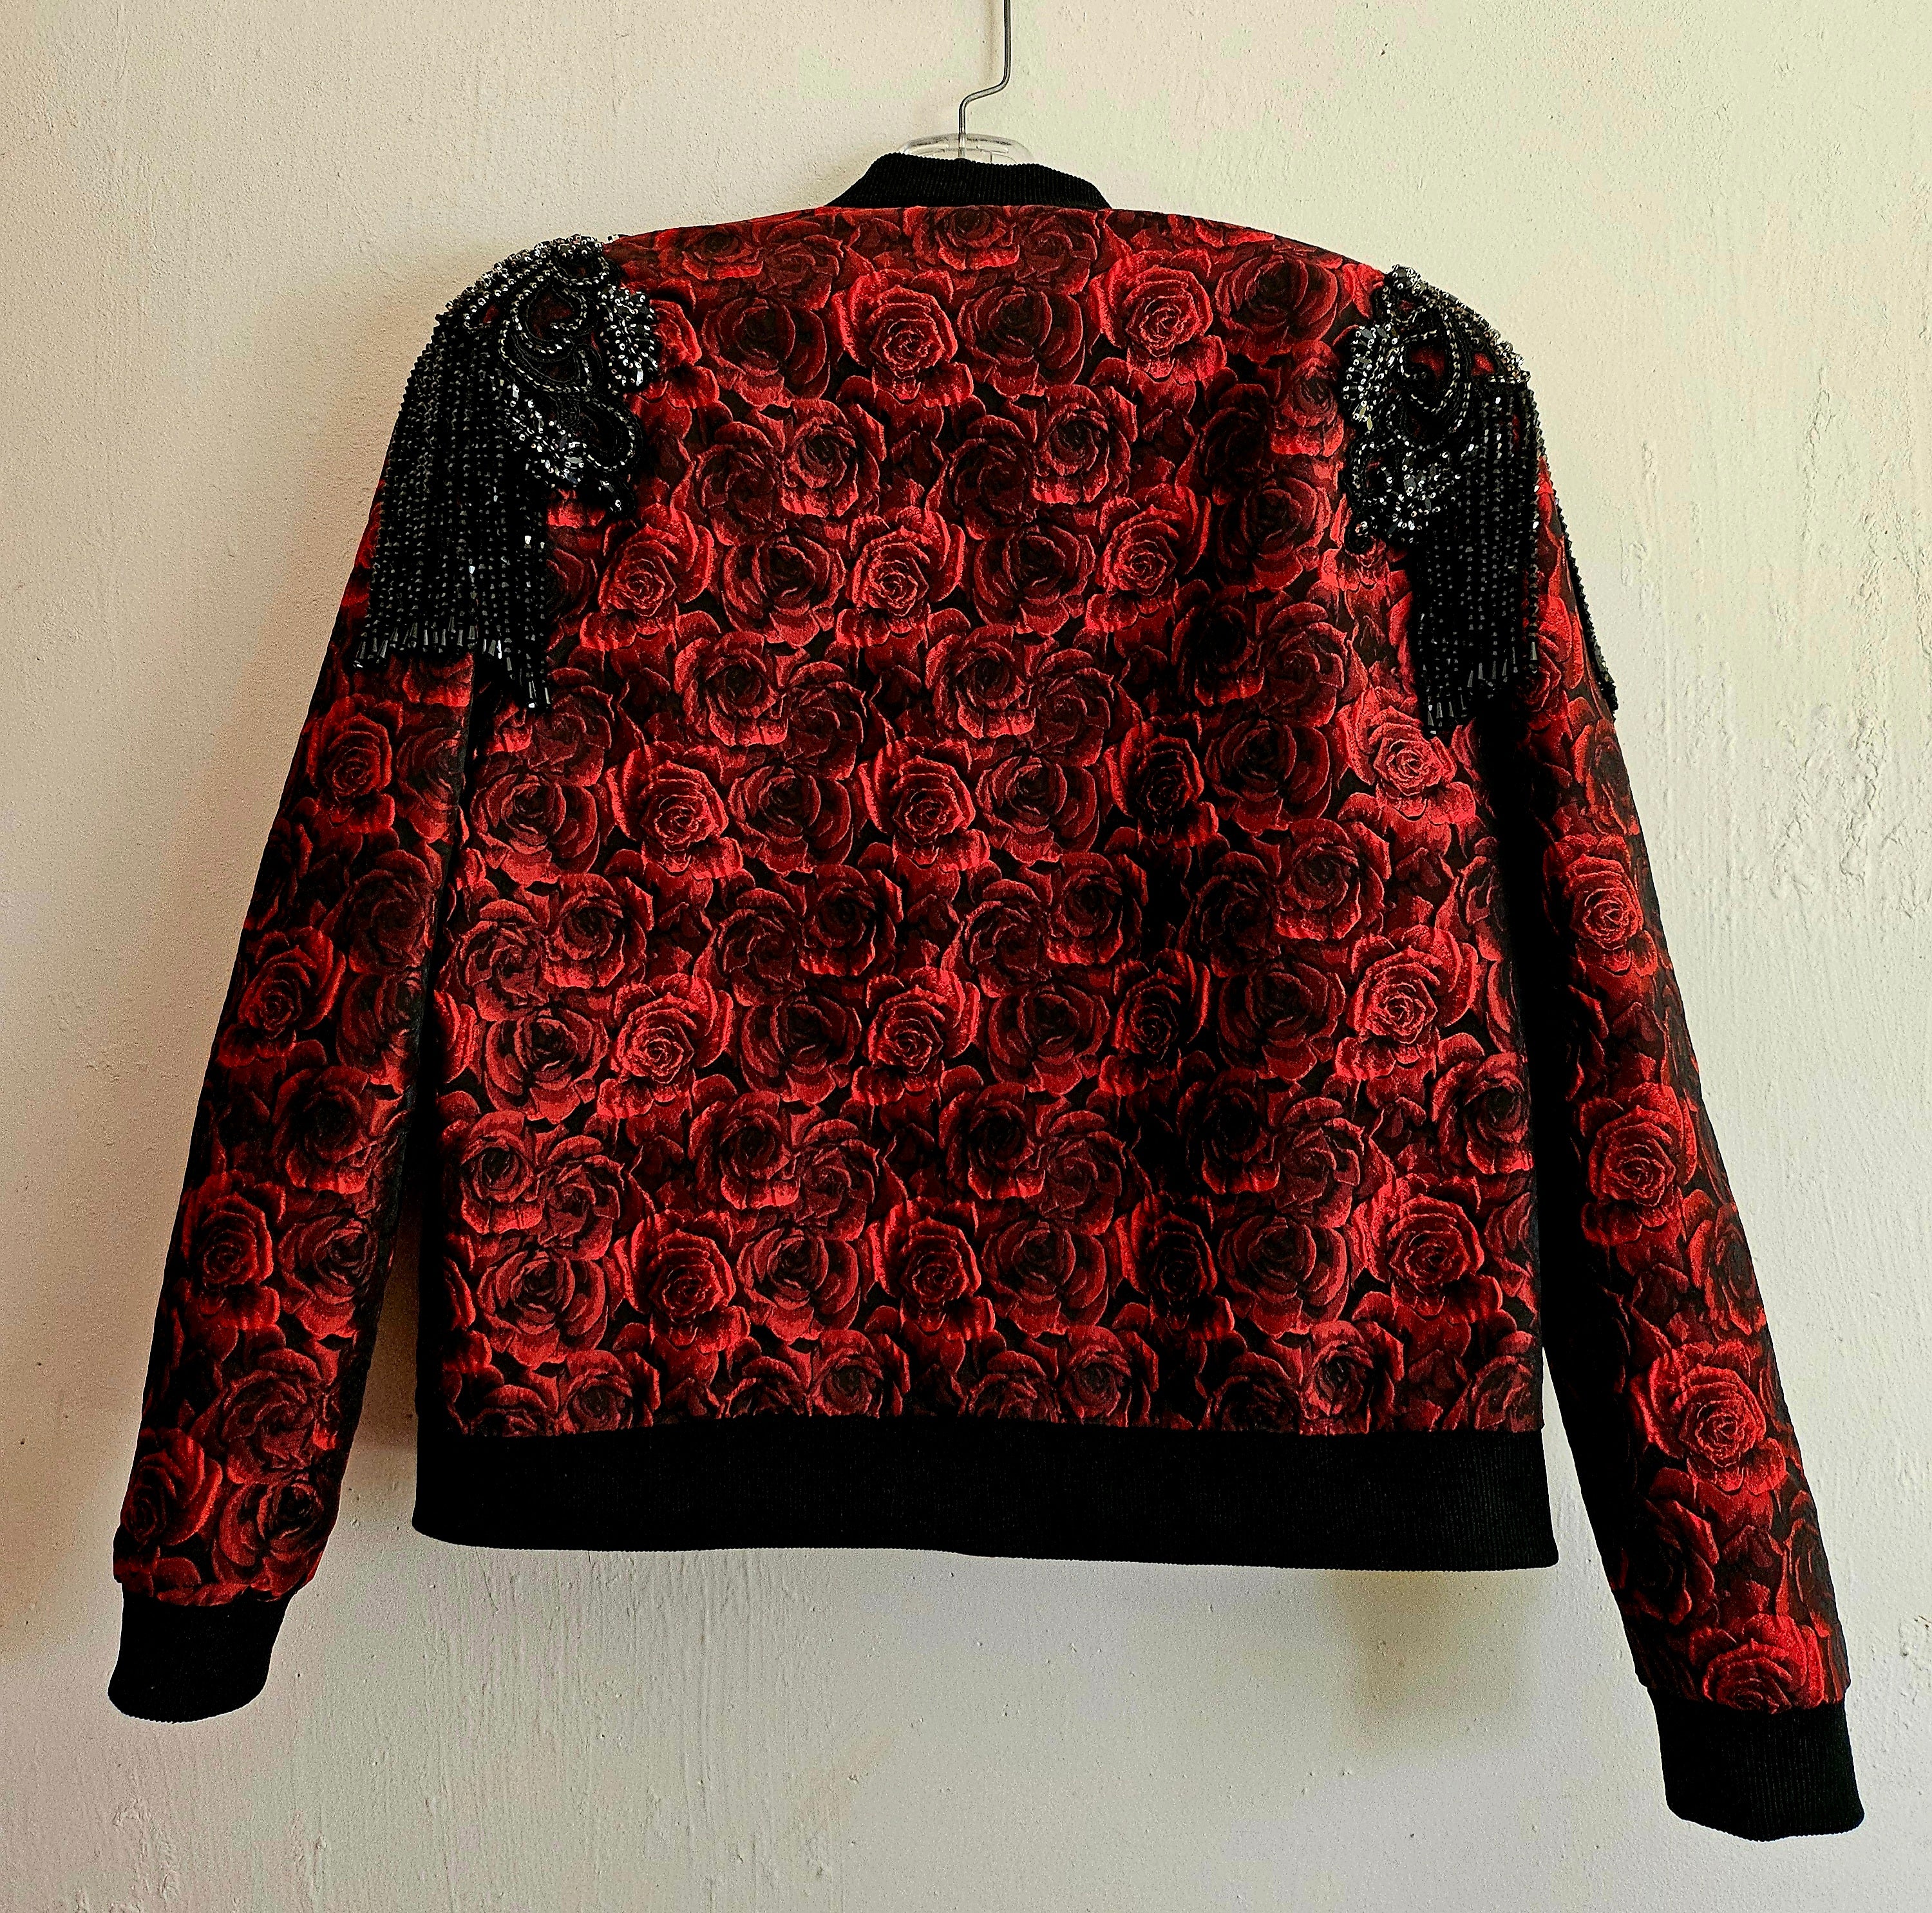 Back view of Red rose brocade bomber jacket with rhinestone appliqued shoulders with beaded fringe.